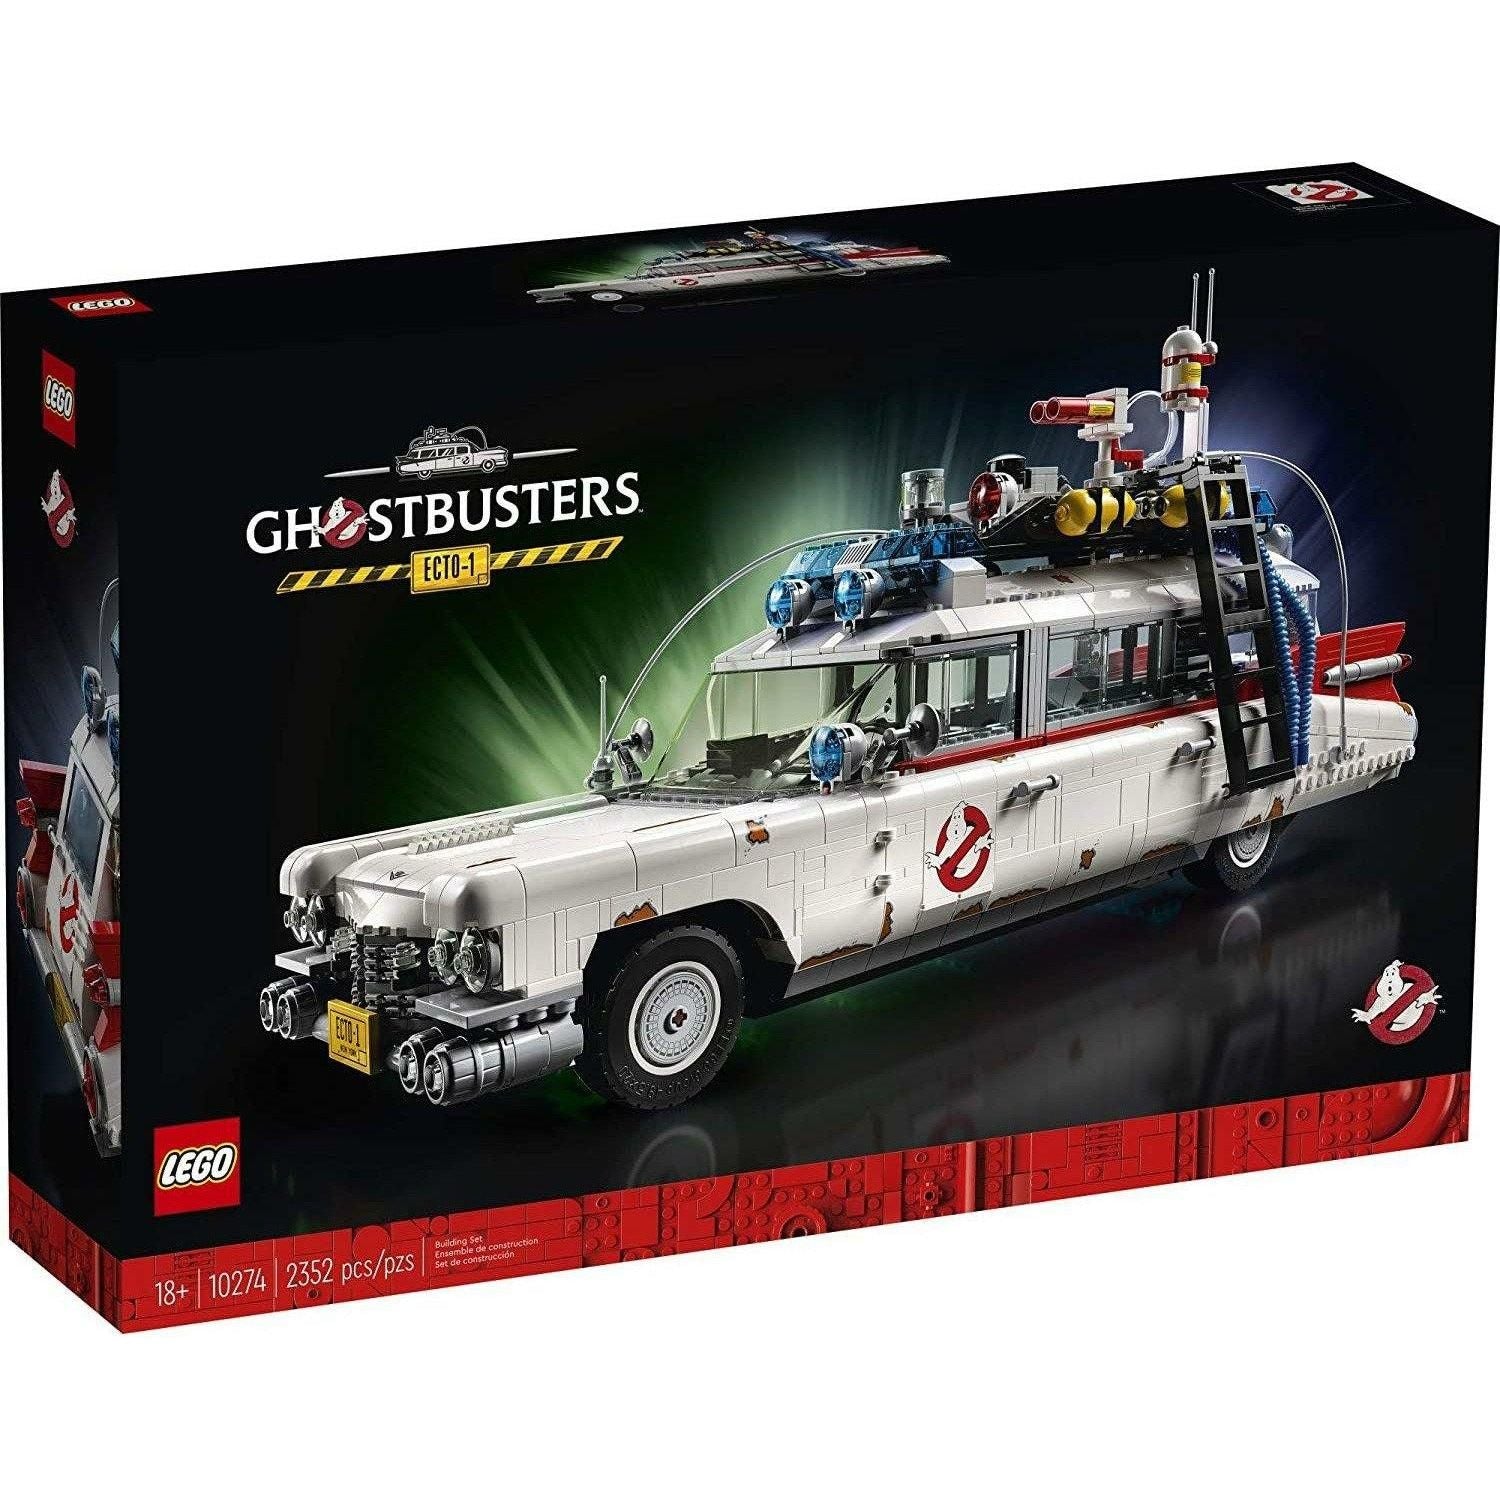 LEGO Ghostbusters ECTO-1 (10274) Building Kit; Displayable Model Car Kit, New 2021 (2,352 Pieces) - BumbleToys - 18+, Boys, Ghostbusters, Ideas, LEGO, OXE, Pre-Order